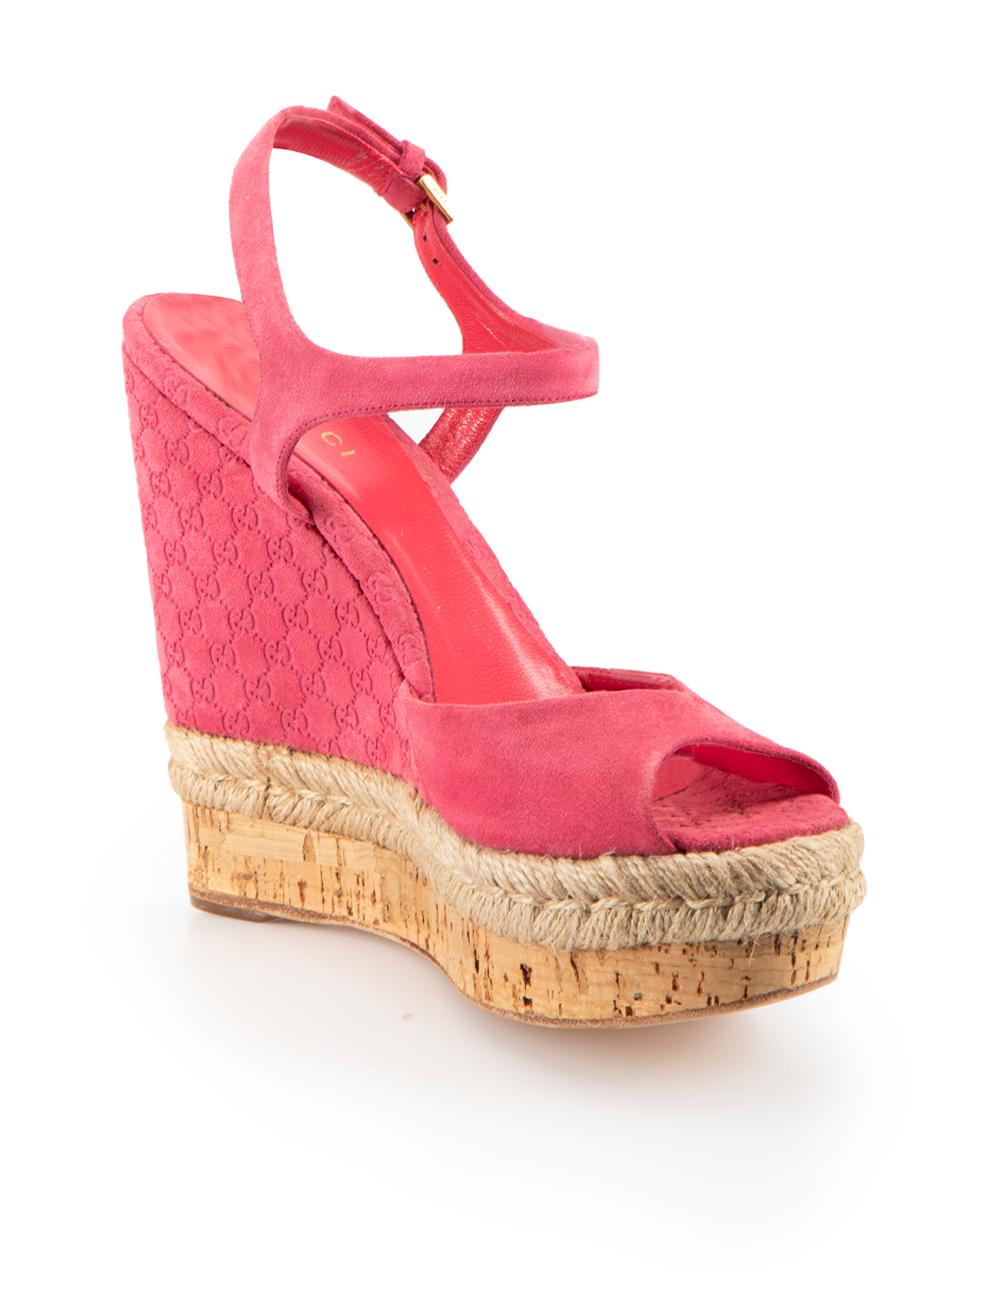 CONDITION is Good. Minor wear to wedges is evident. Light wear to suede upper with some discolouration found throughout on this used Gucci designer resale item.



Details


Pink

Suede

Wedge sandals

Peep toe

Platform

High heeled

Adjustable